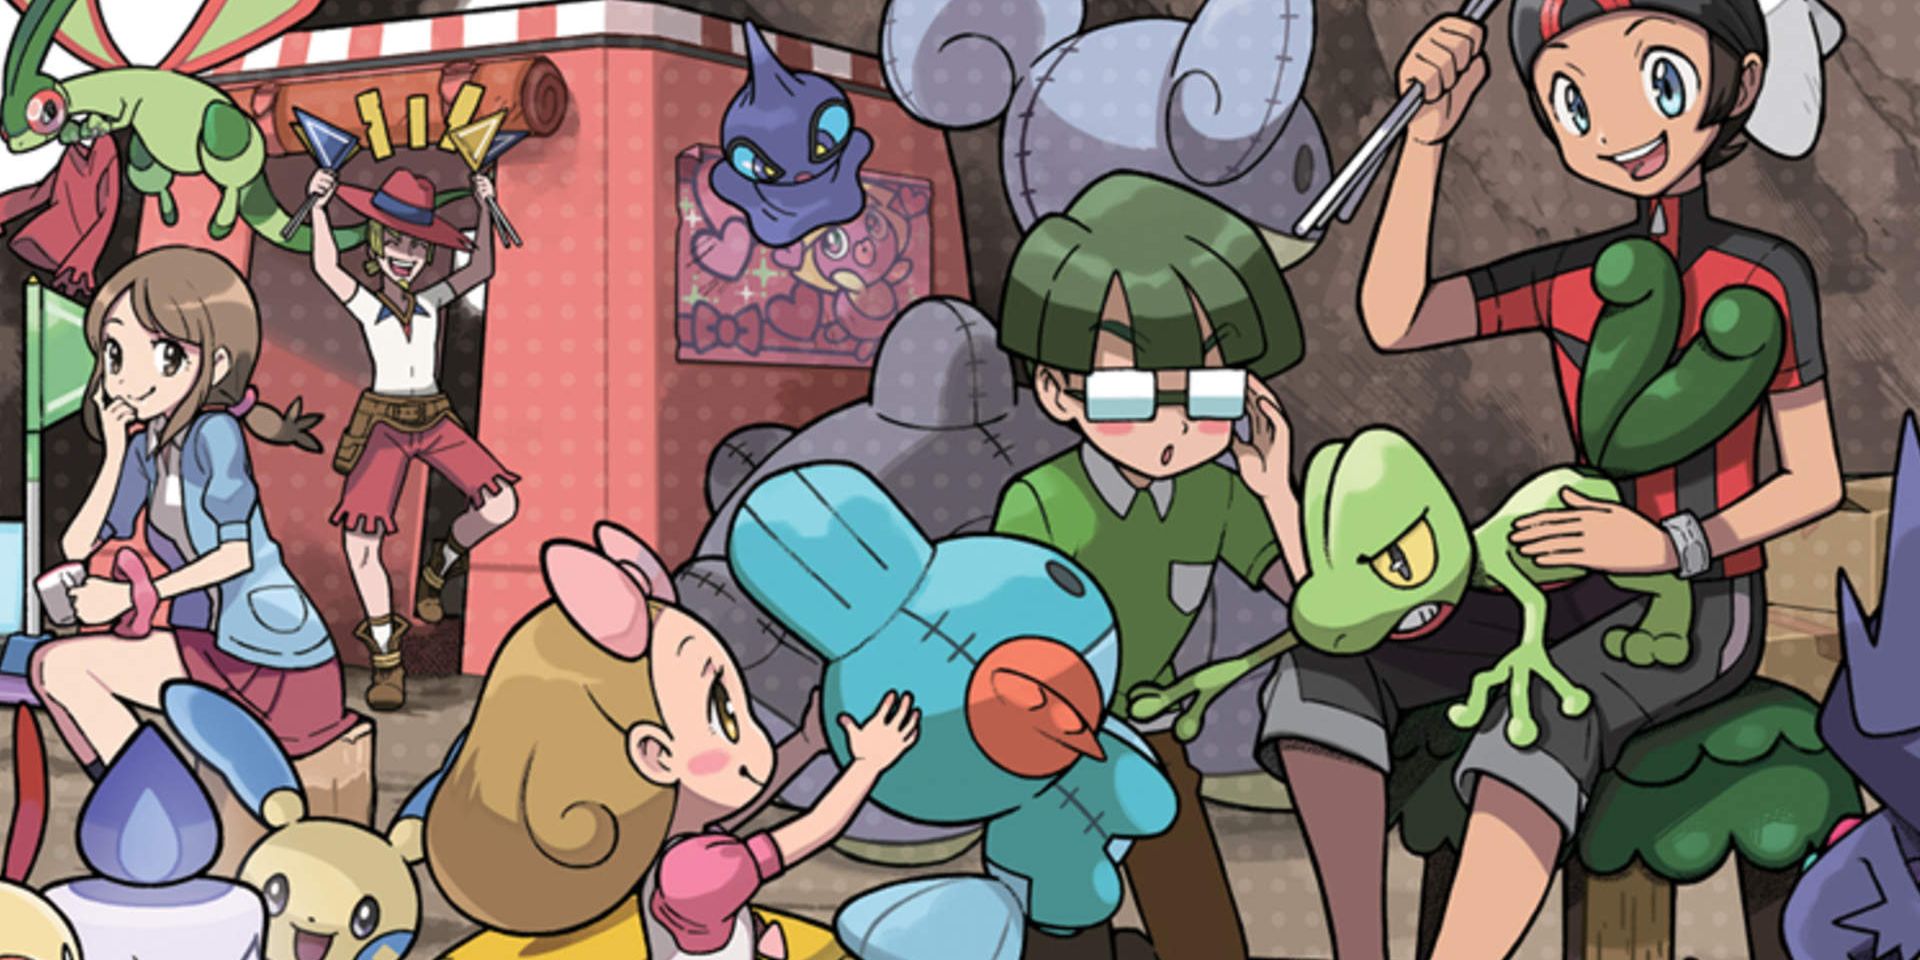 Pokemon Omega Ruby & Sapphire art showing characters interacting with both real and plush Pokemon.